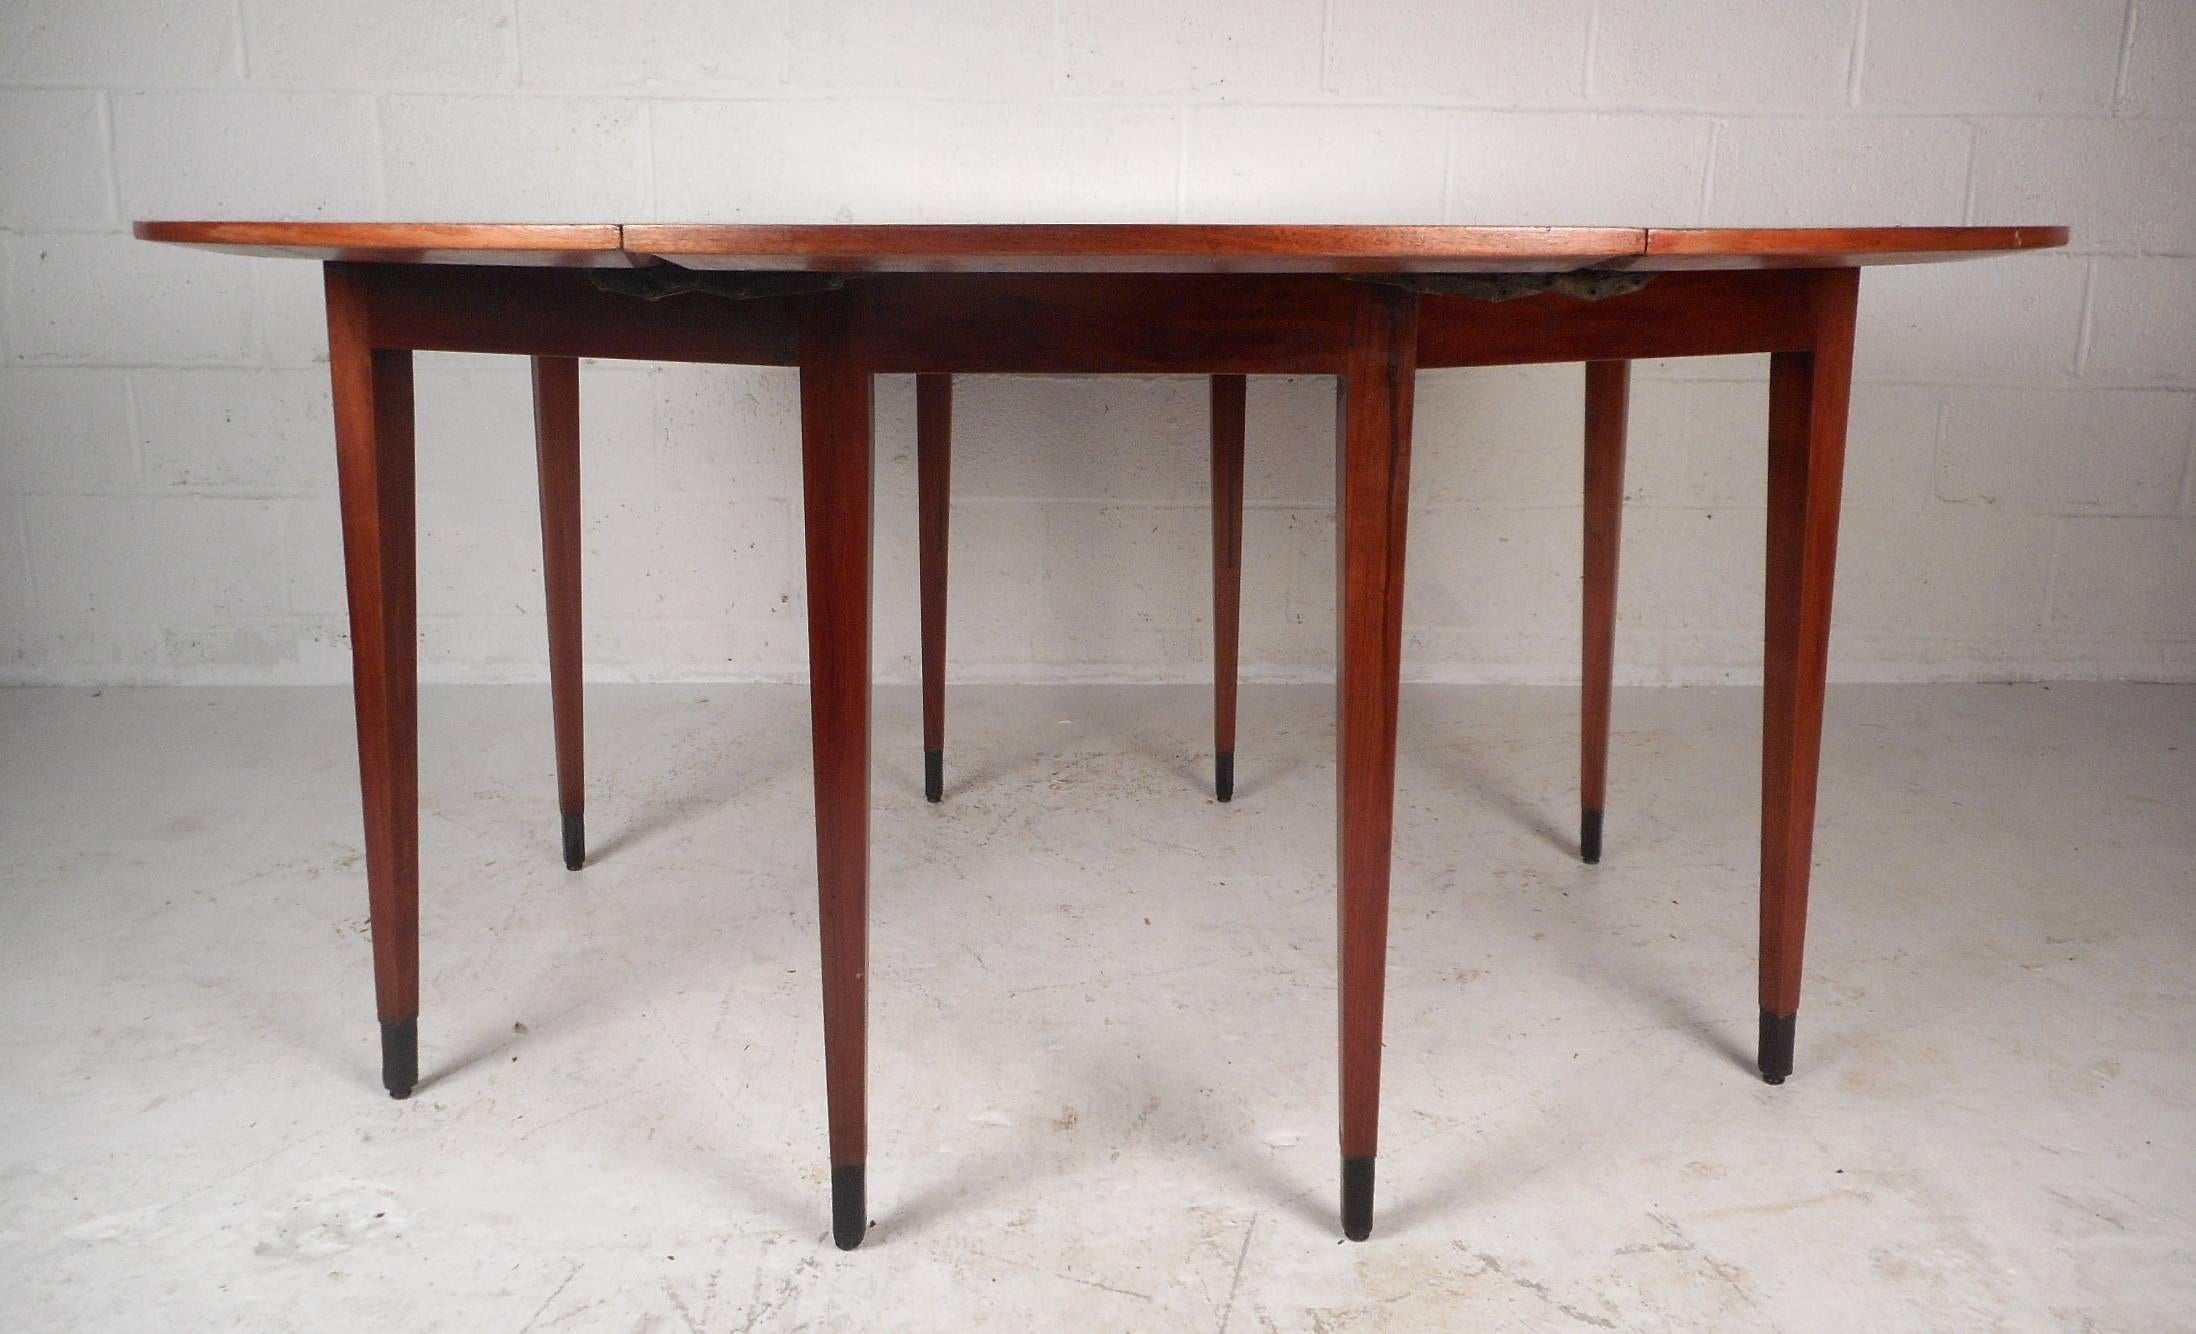 This gorgeous vintage modern dining table features a drop leaf design with gate legs. When this unique table is fully extended is measures at 72 inches wide by 60 inches deep. This newly refinished dining table has rich walnut wood grain throughout.